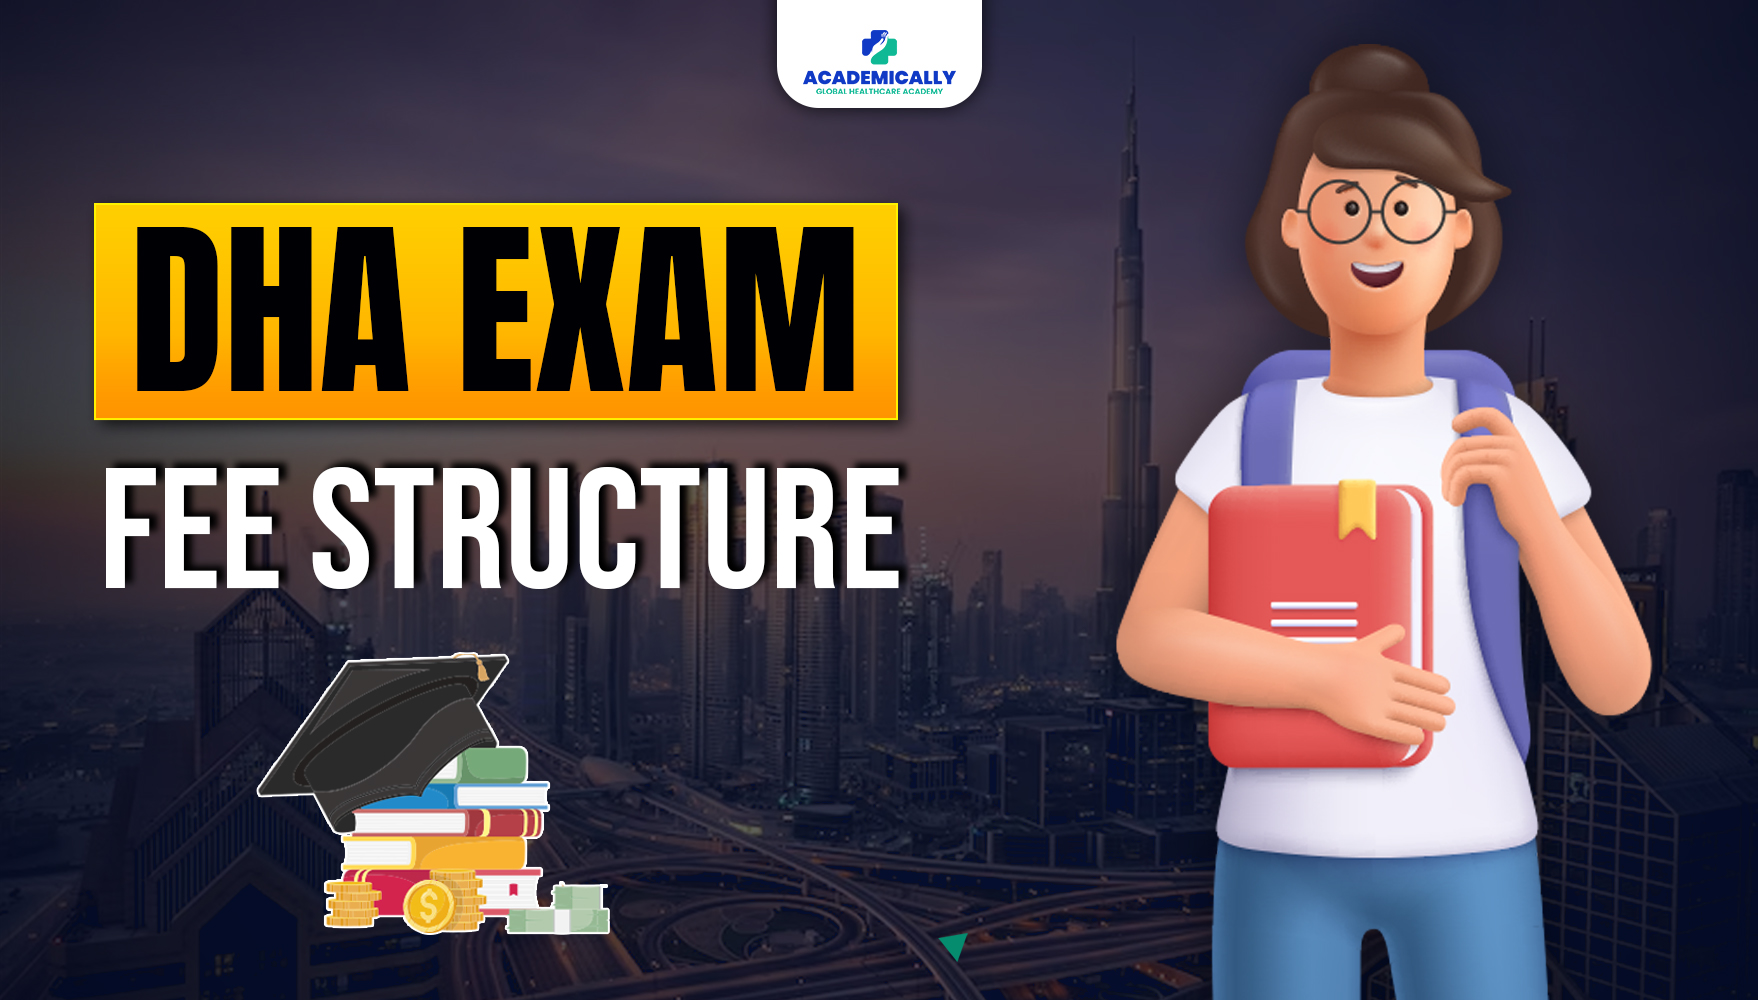 Fee Structure of DHA Exam